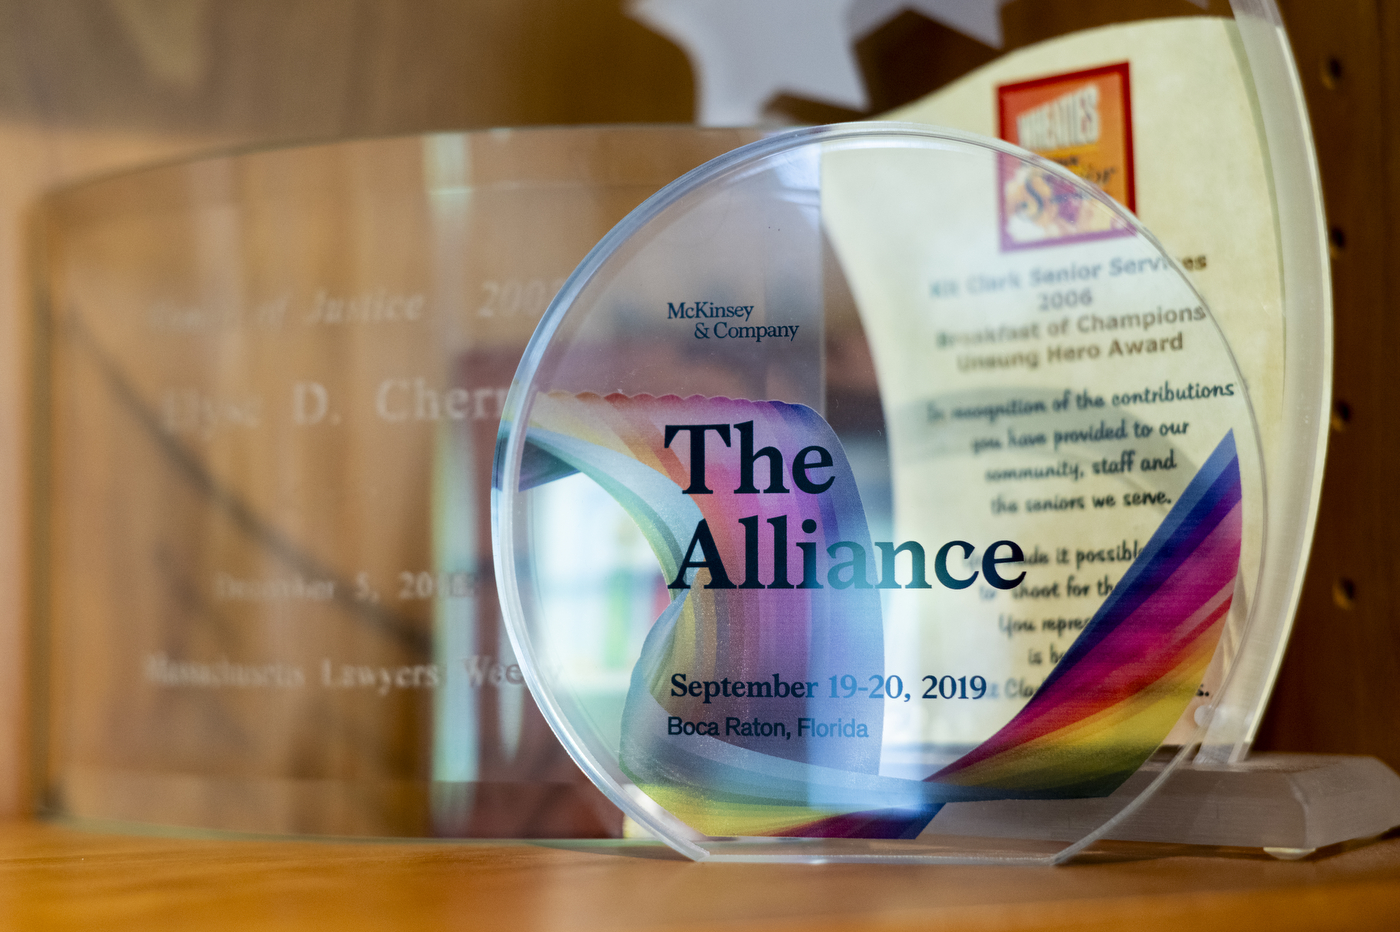 2019 The Alliance award by McKinsey & Company